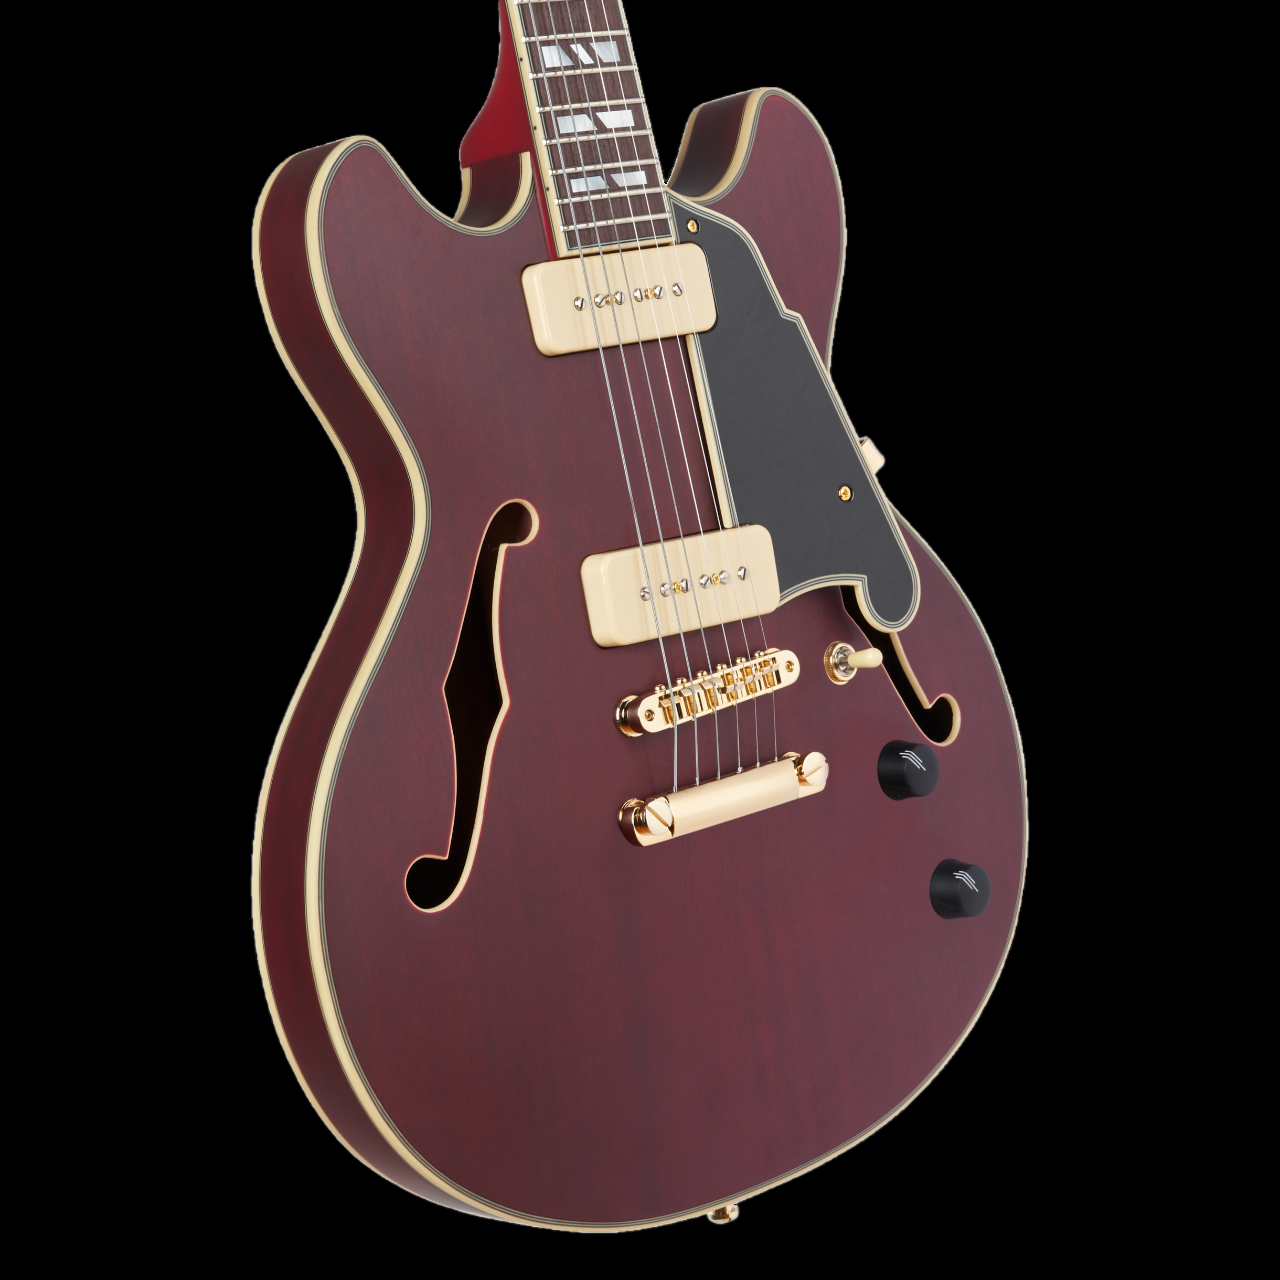 D'Angelico Deluxe Mini DC Satin Trans Wine Electric Guitar